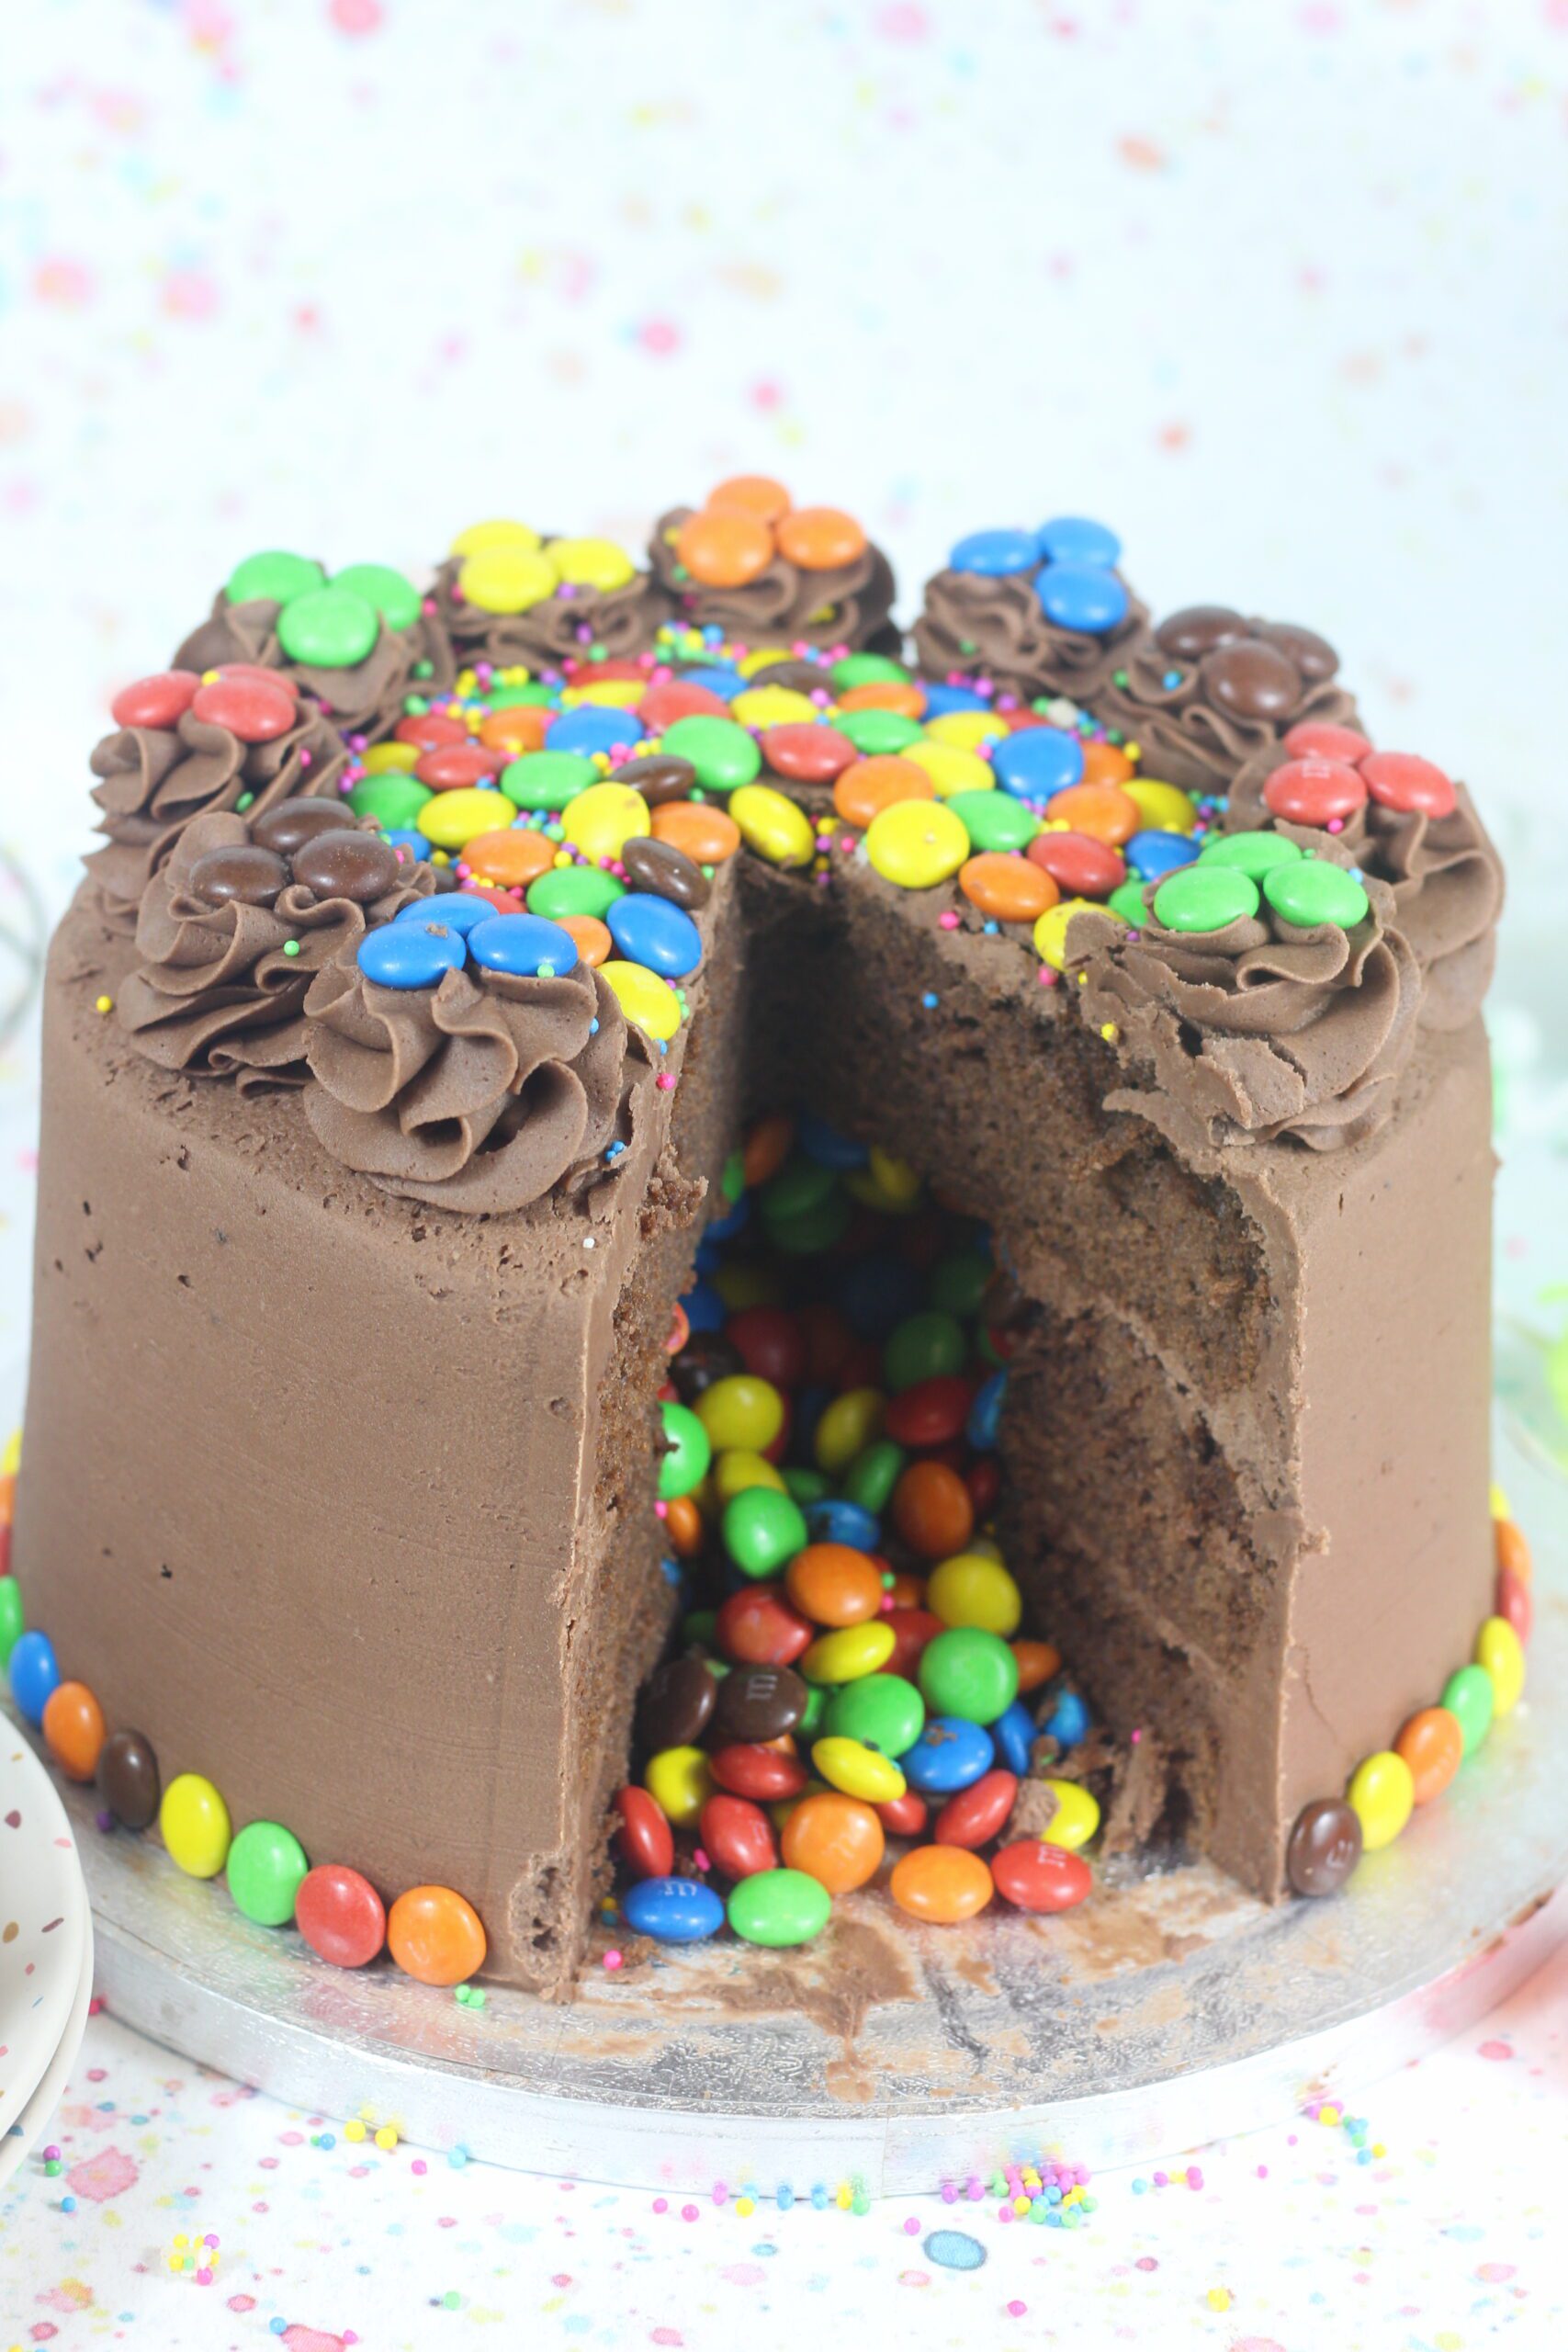 Simplest Eggless Chocolate Kitkat Birthday Cake With M&Ms And Chocolate  Chips - RecipeMagik